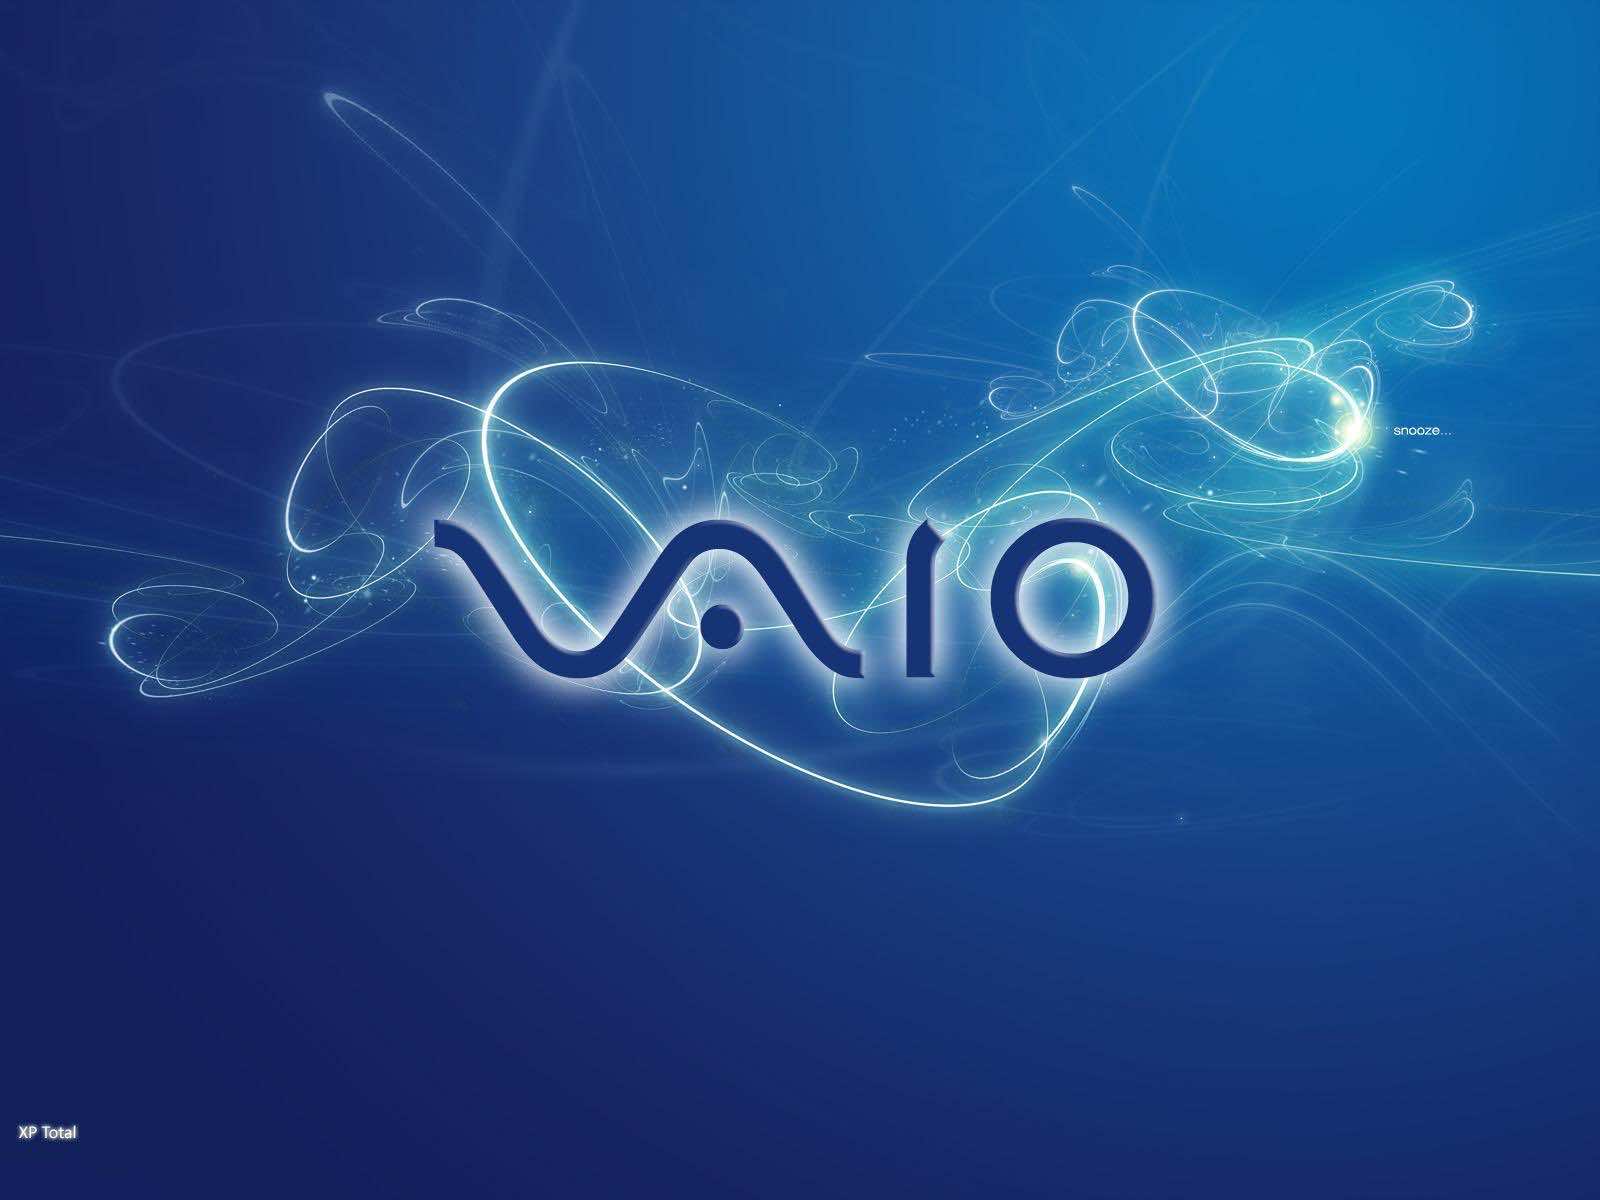 HD Sony Vaio Wallpapers & Vaio Backgrounds For Free Download